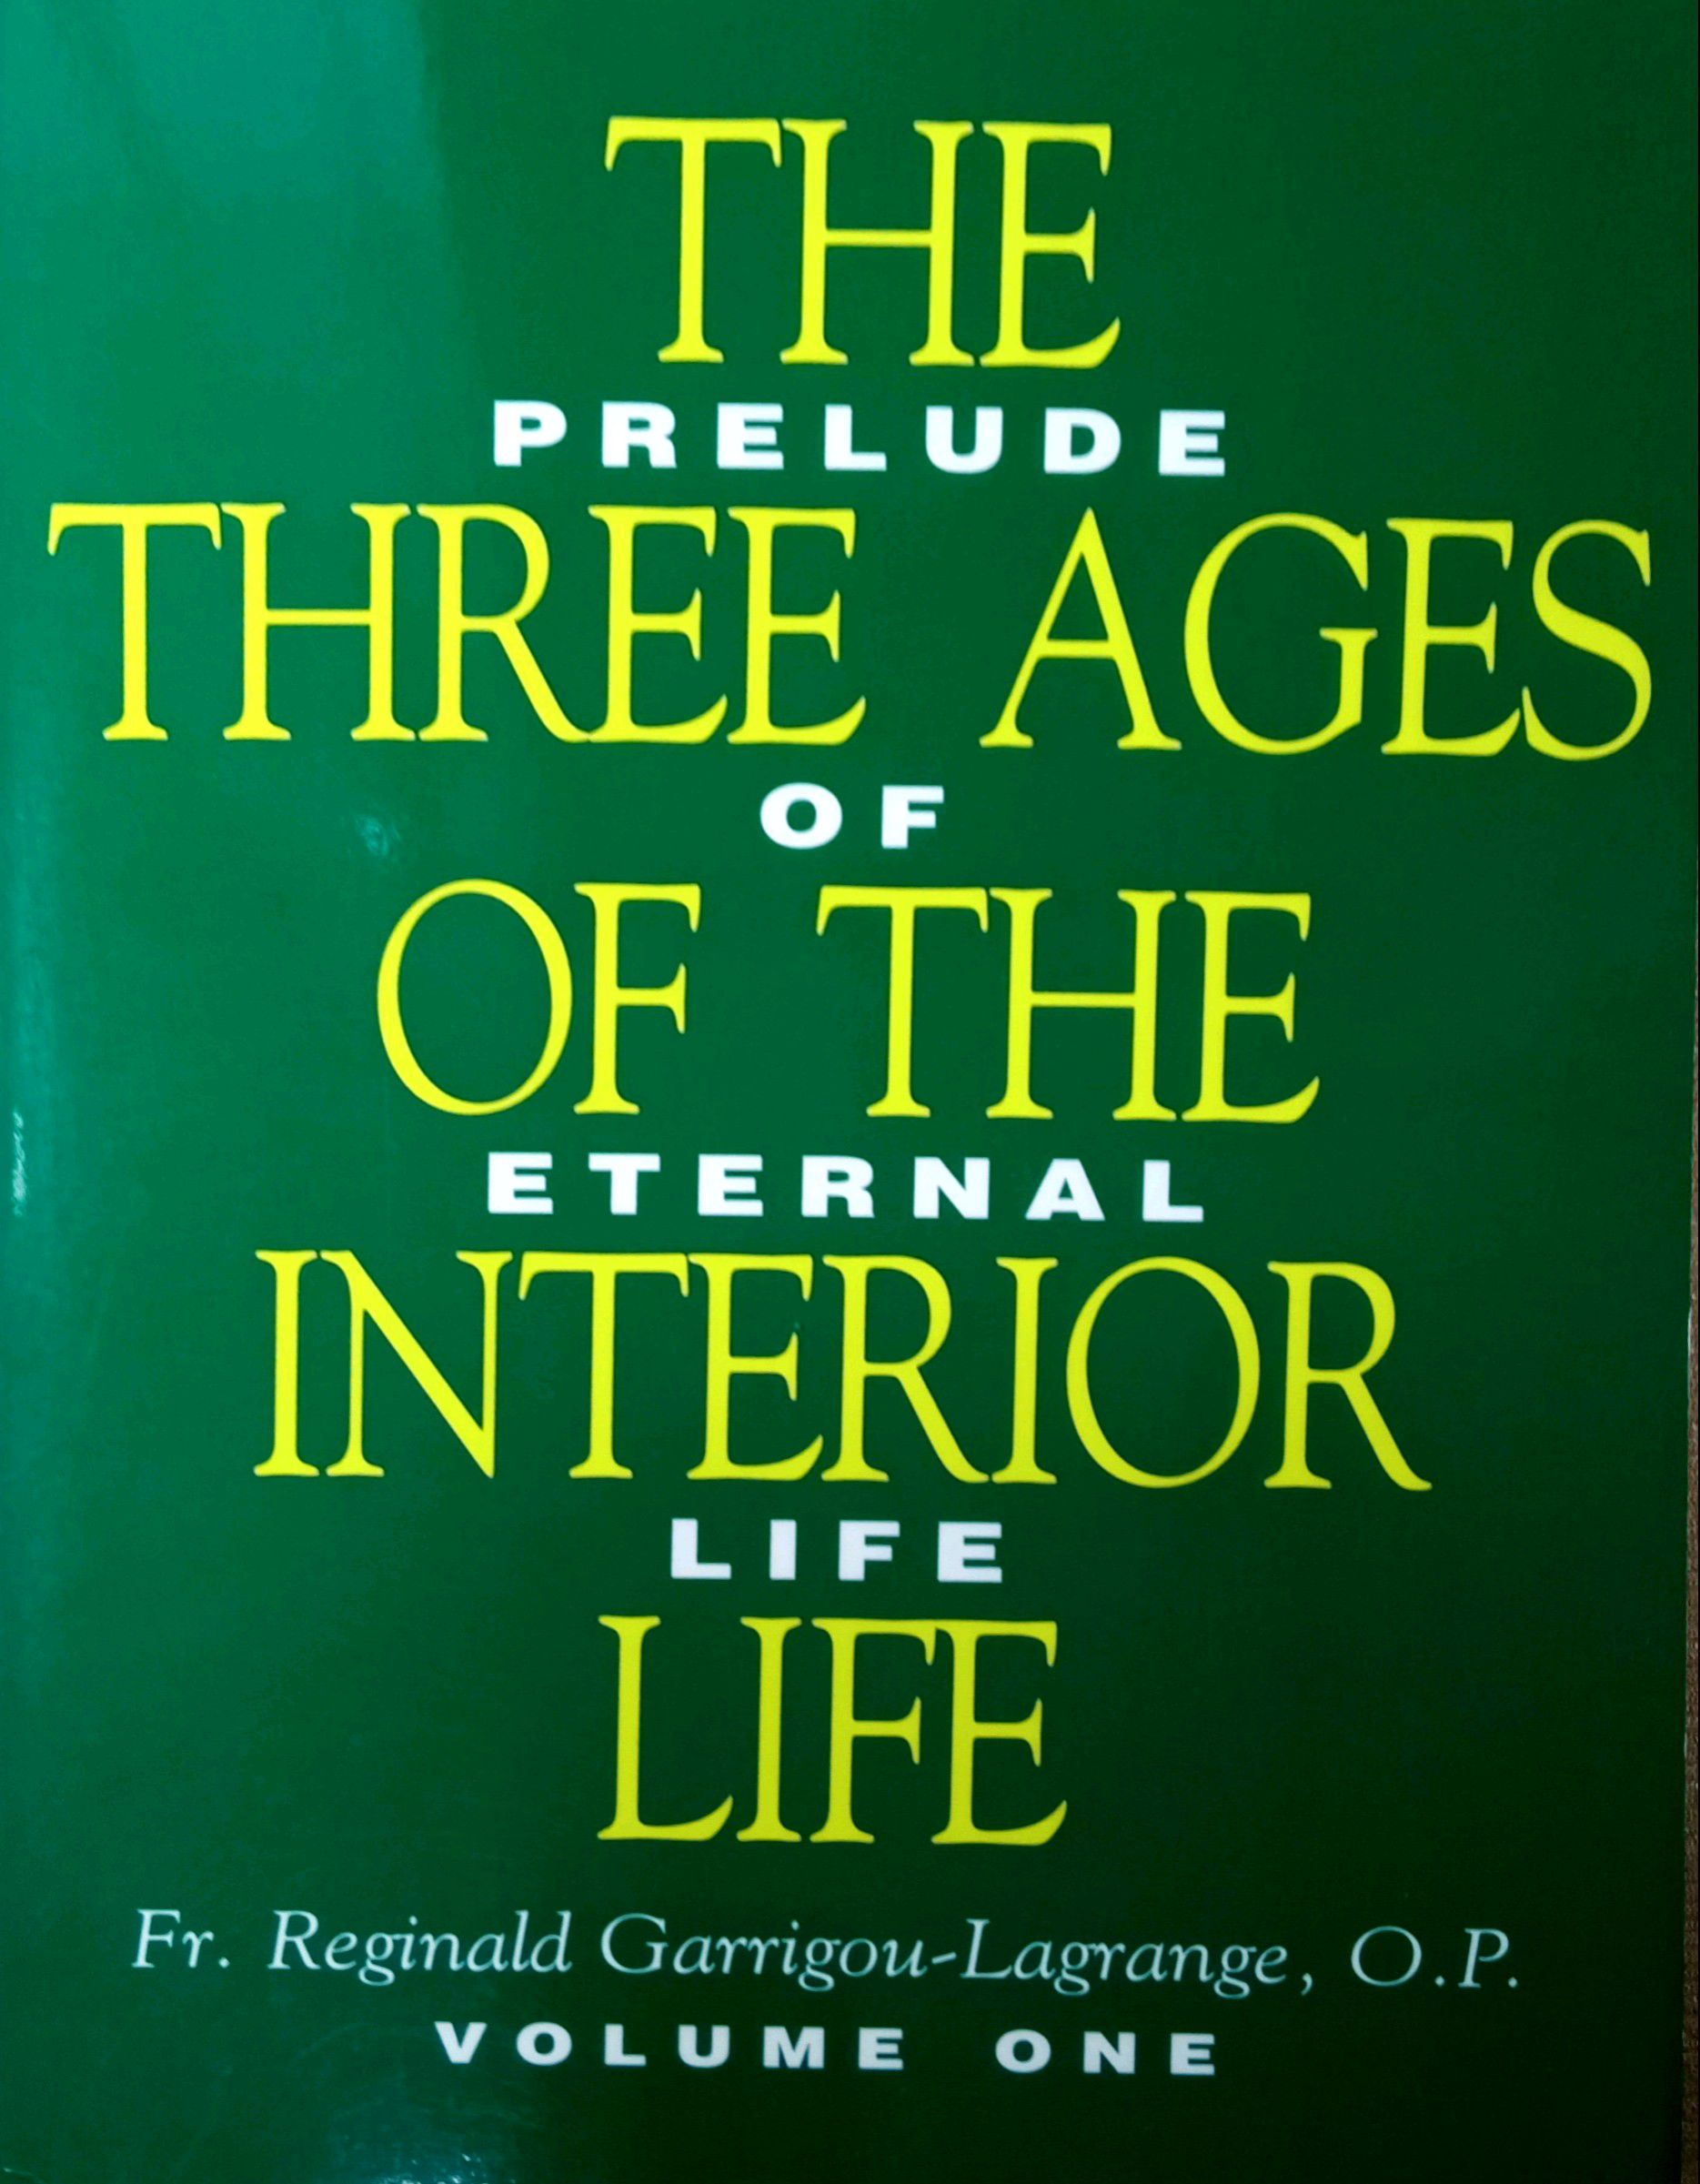 THE THREE AGES OF THE INTERIOR LIFE